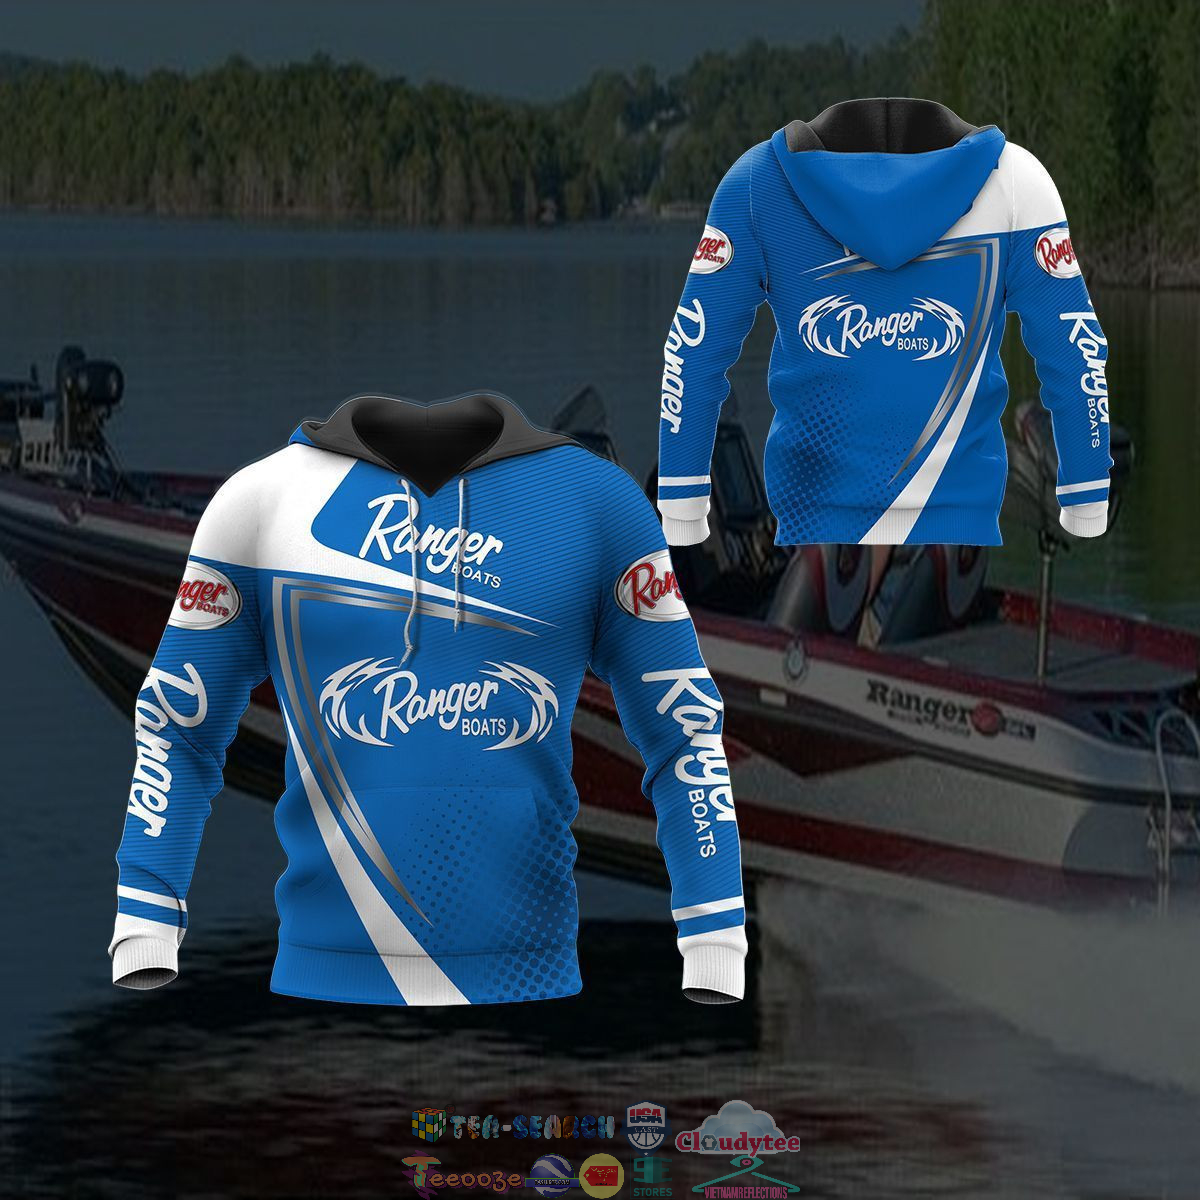 Ranger Boats ver 4 3D hoodie and t-shirt